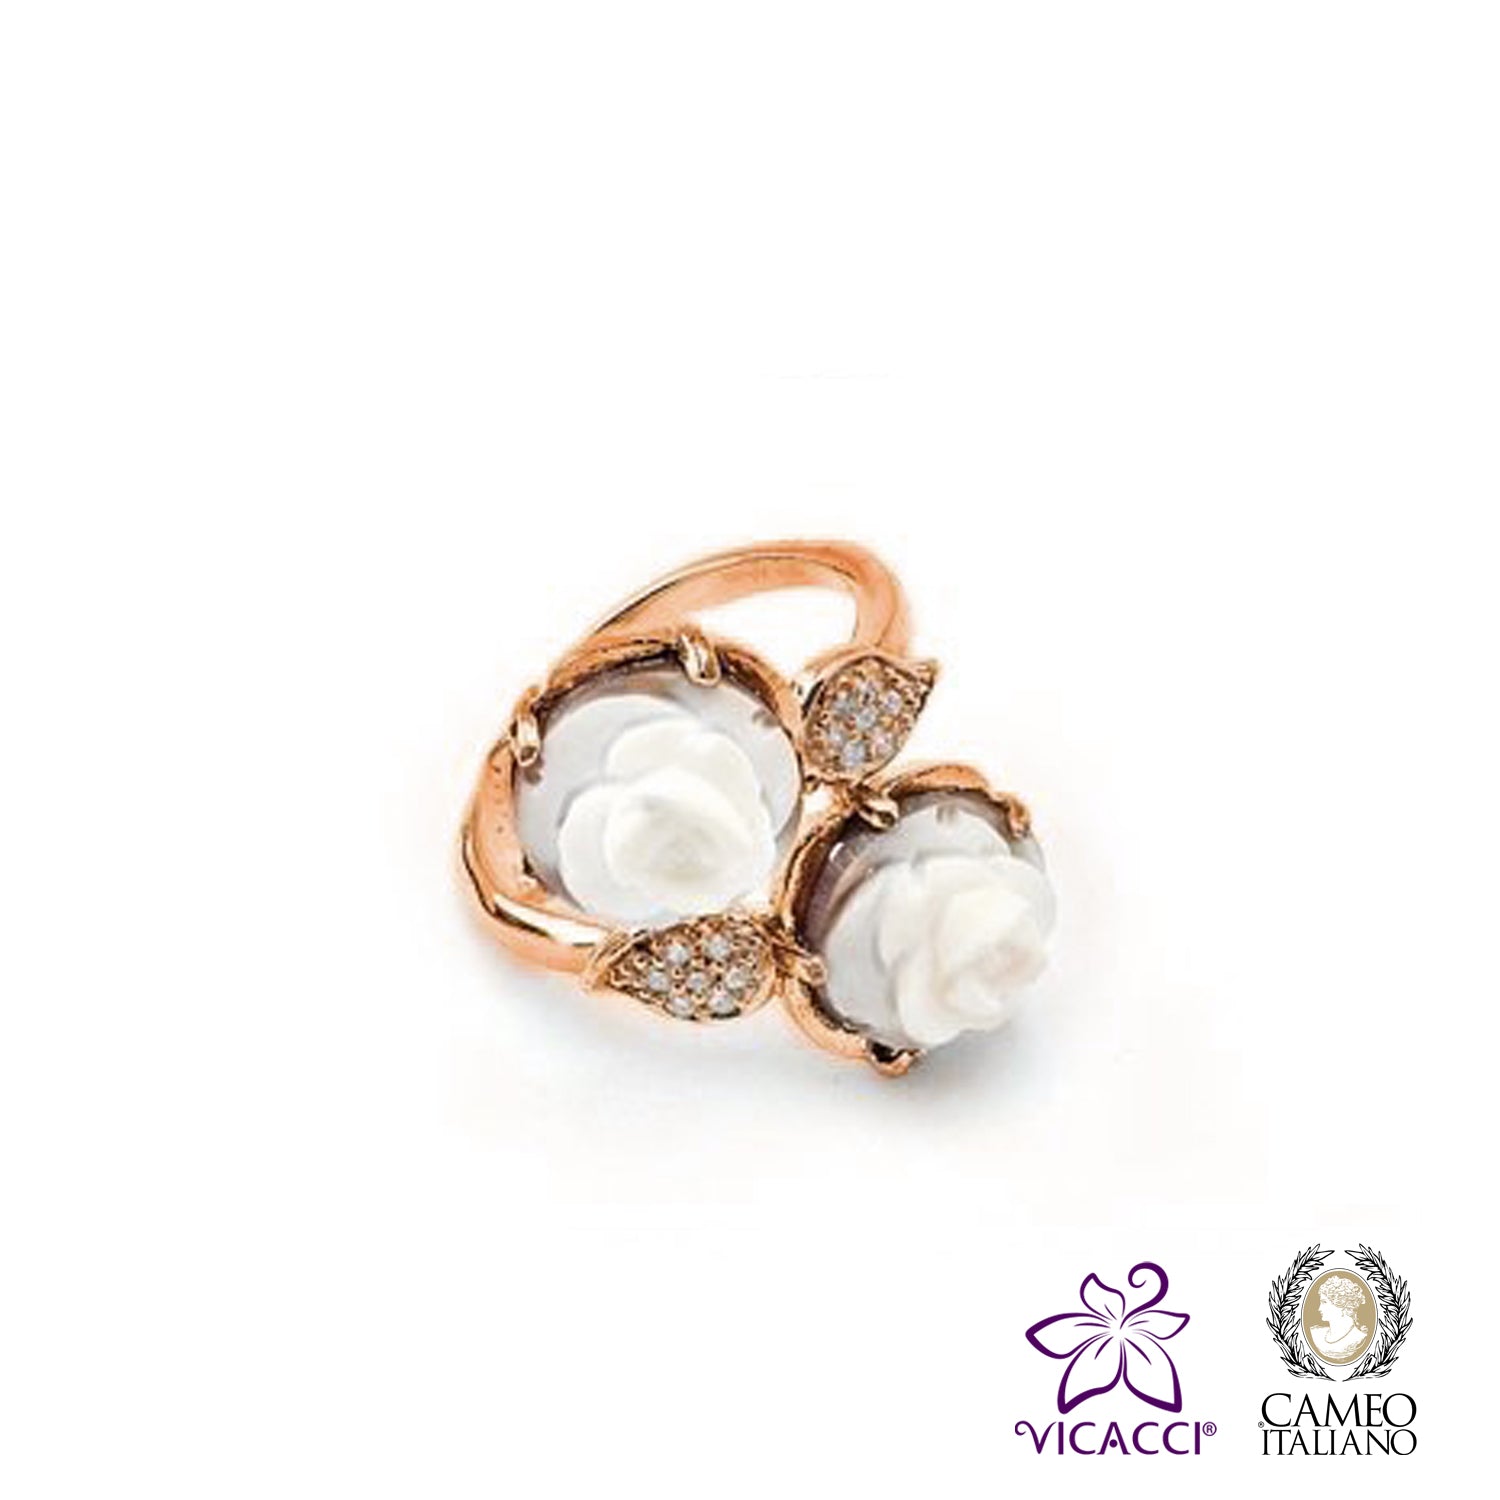 Cameo Italiano, A38D Ring, Rose Gold Plated Sterling Silver